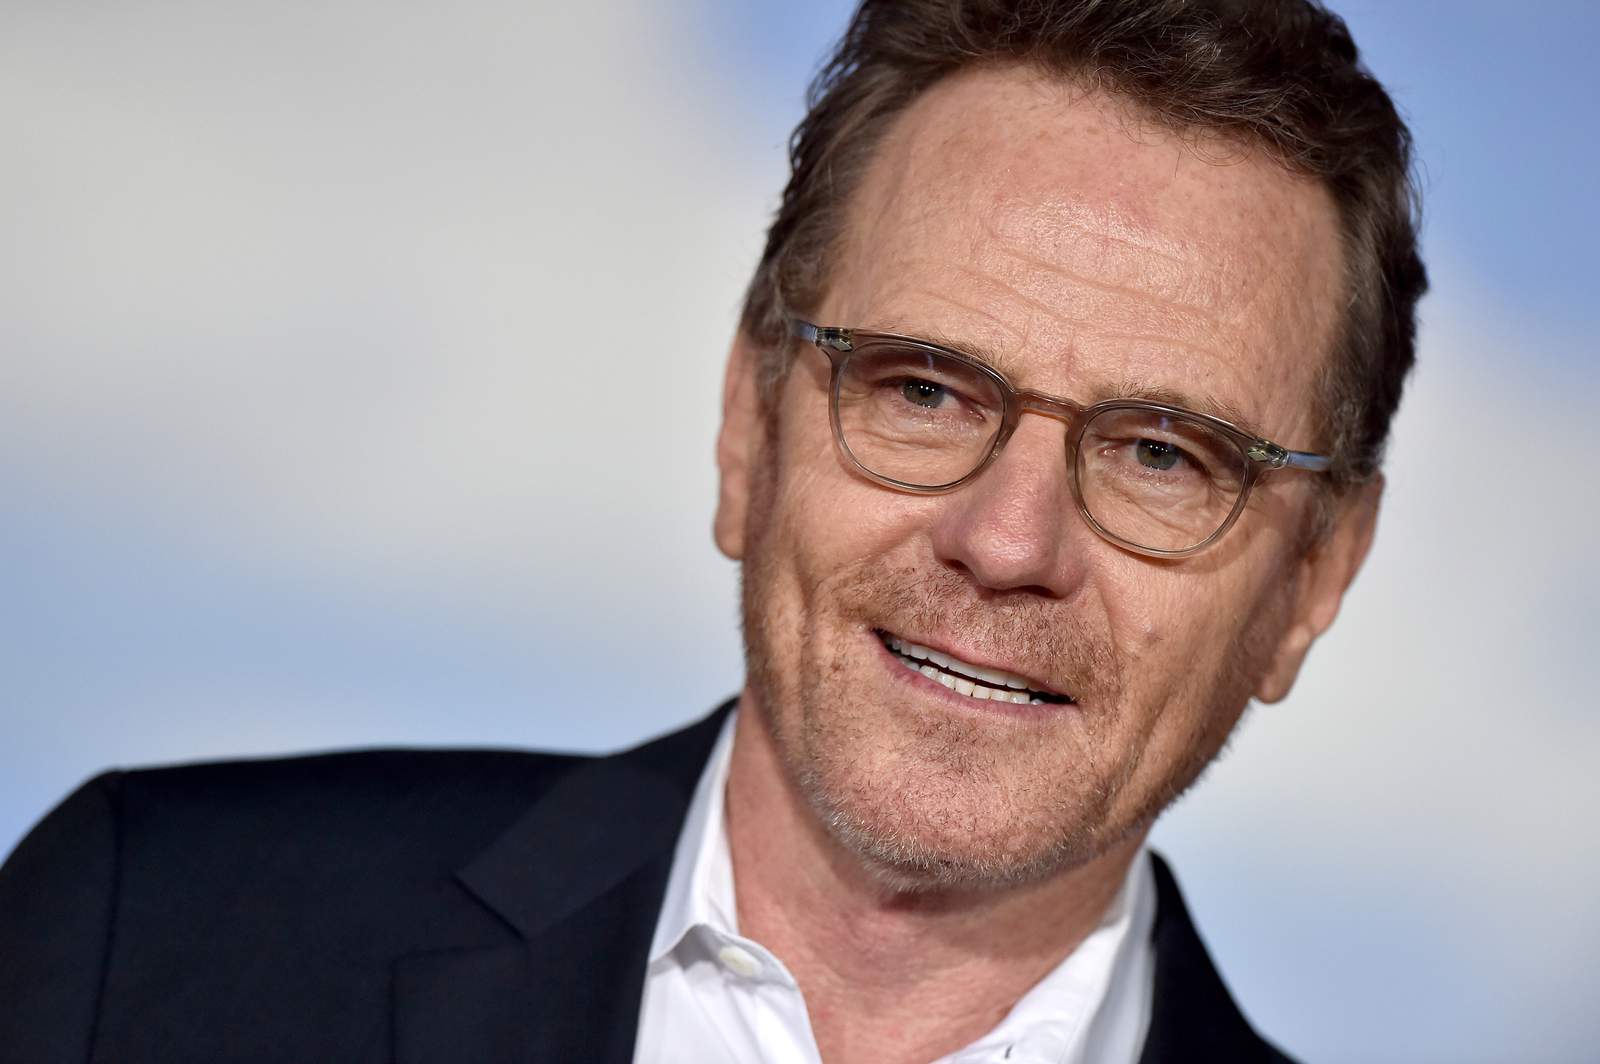 Actor Bryan Cranston wears a Walter White mask onstage at the